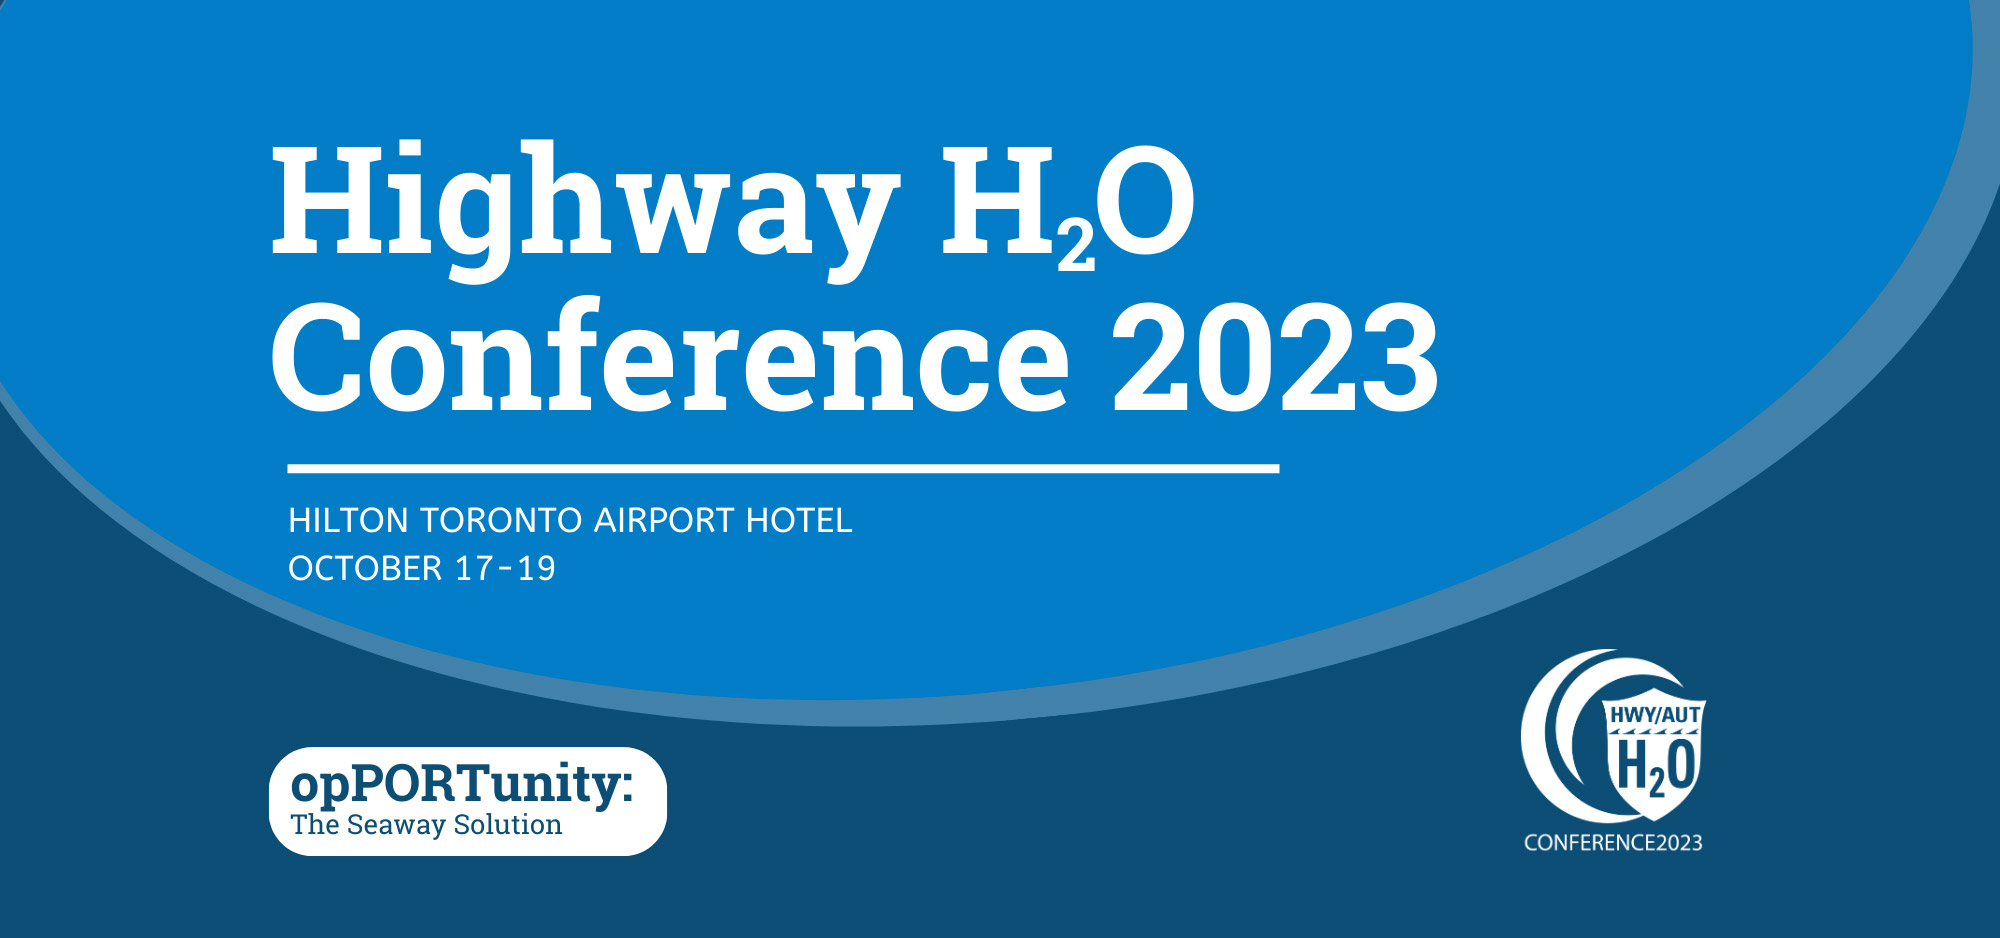 HwyH2O Conference 2023